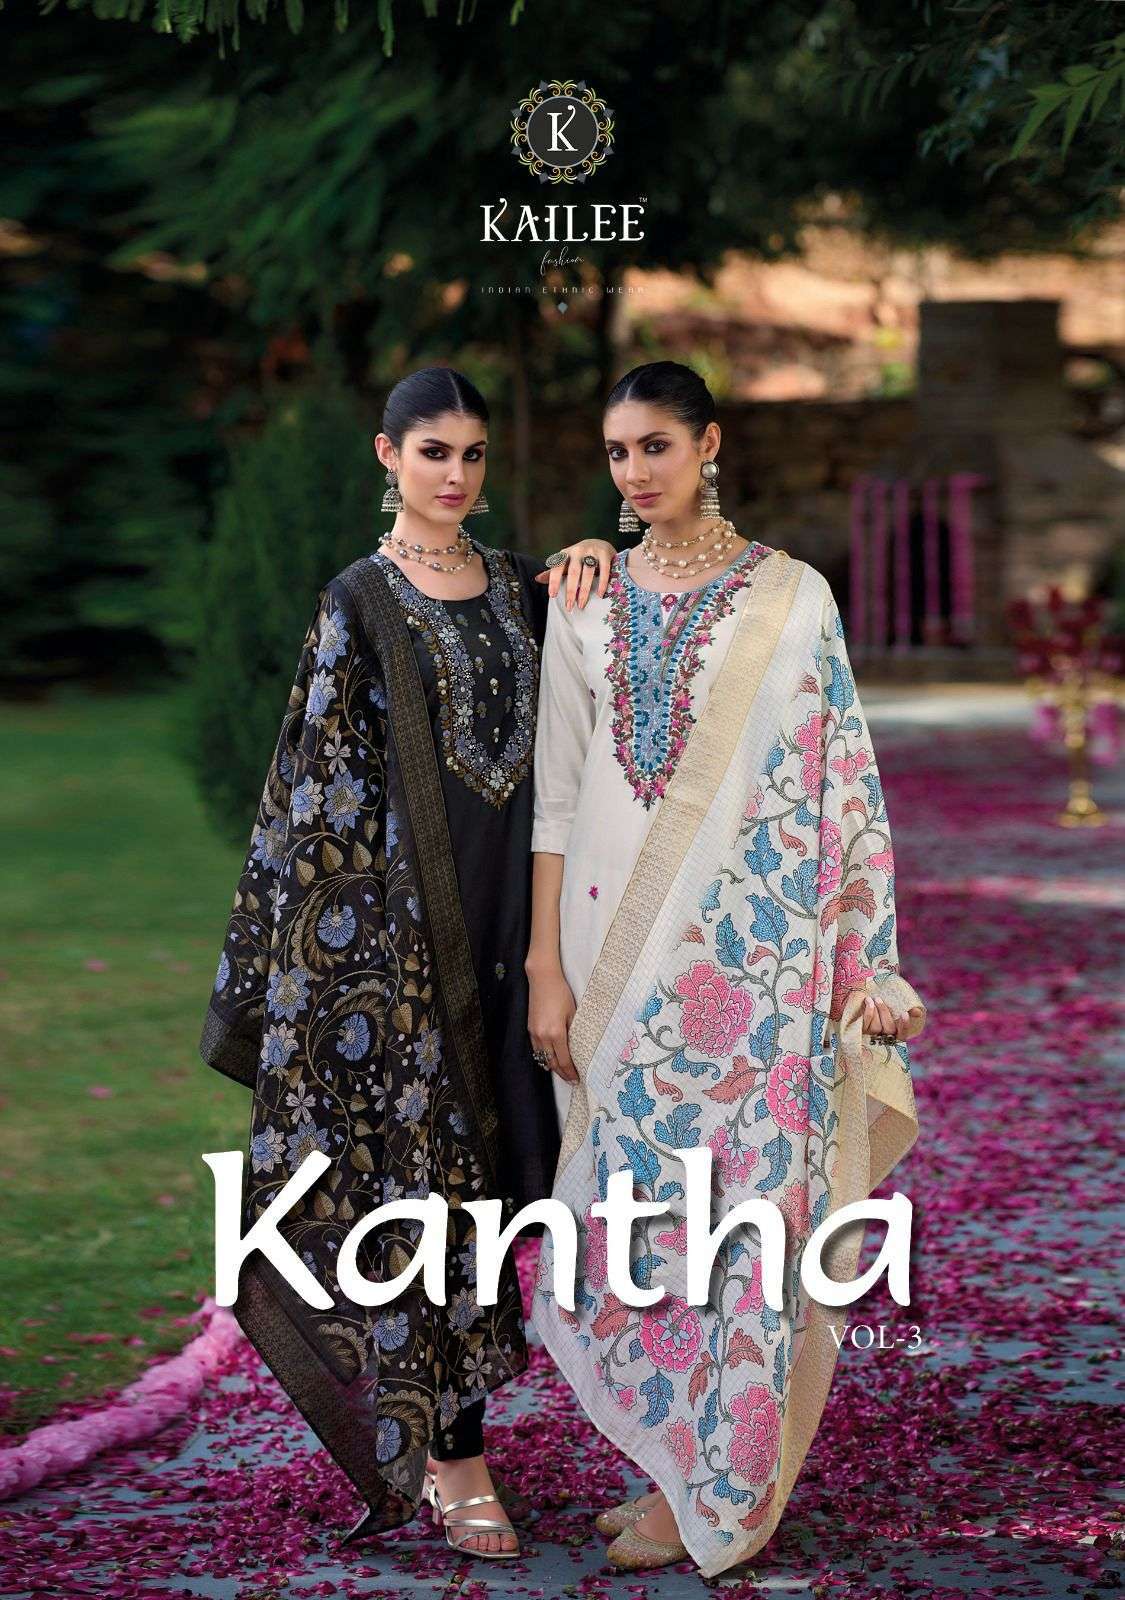 kailee fashion kantha vol 3 series 41311-41315 pure viscose silk suit 